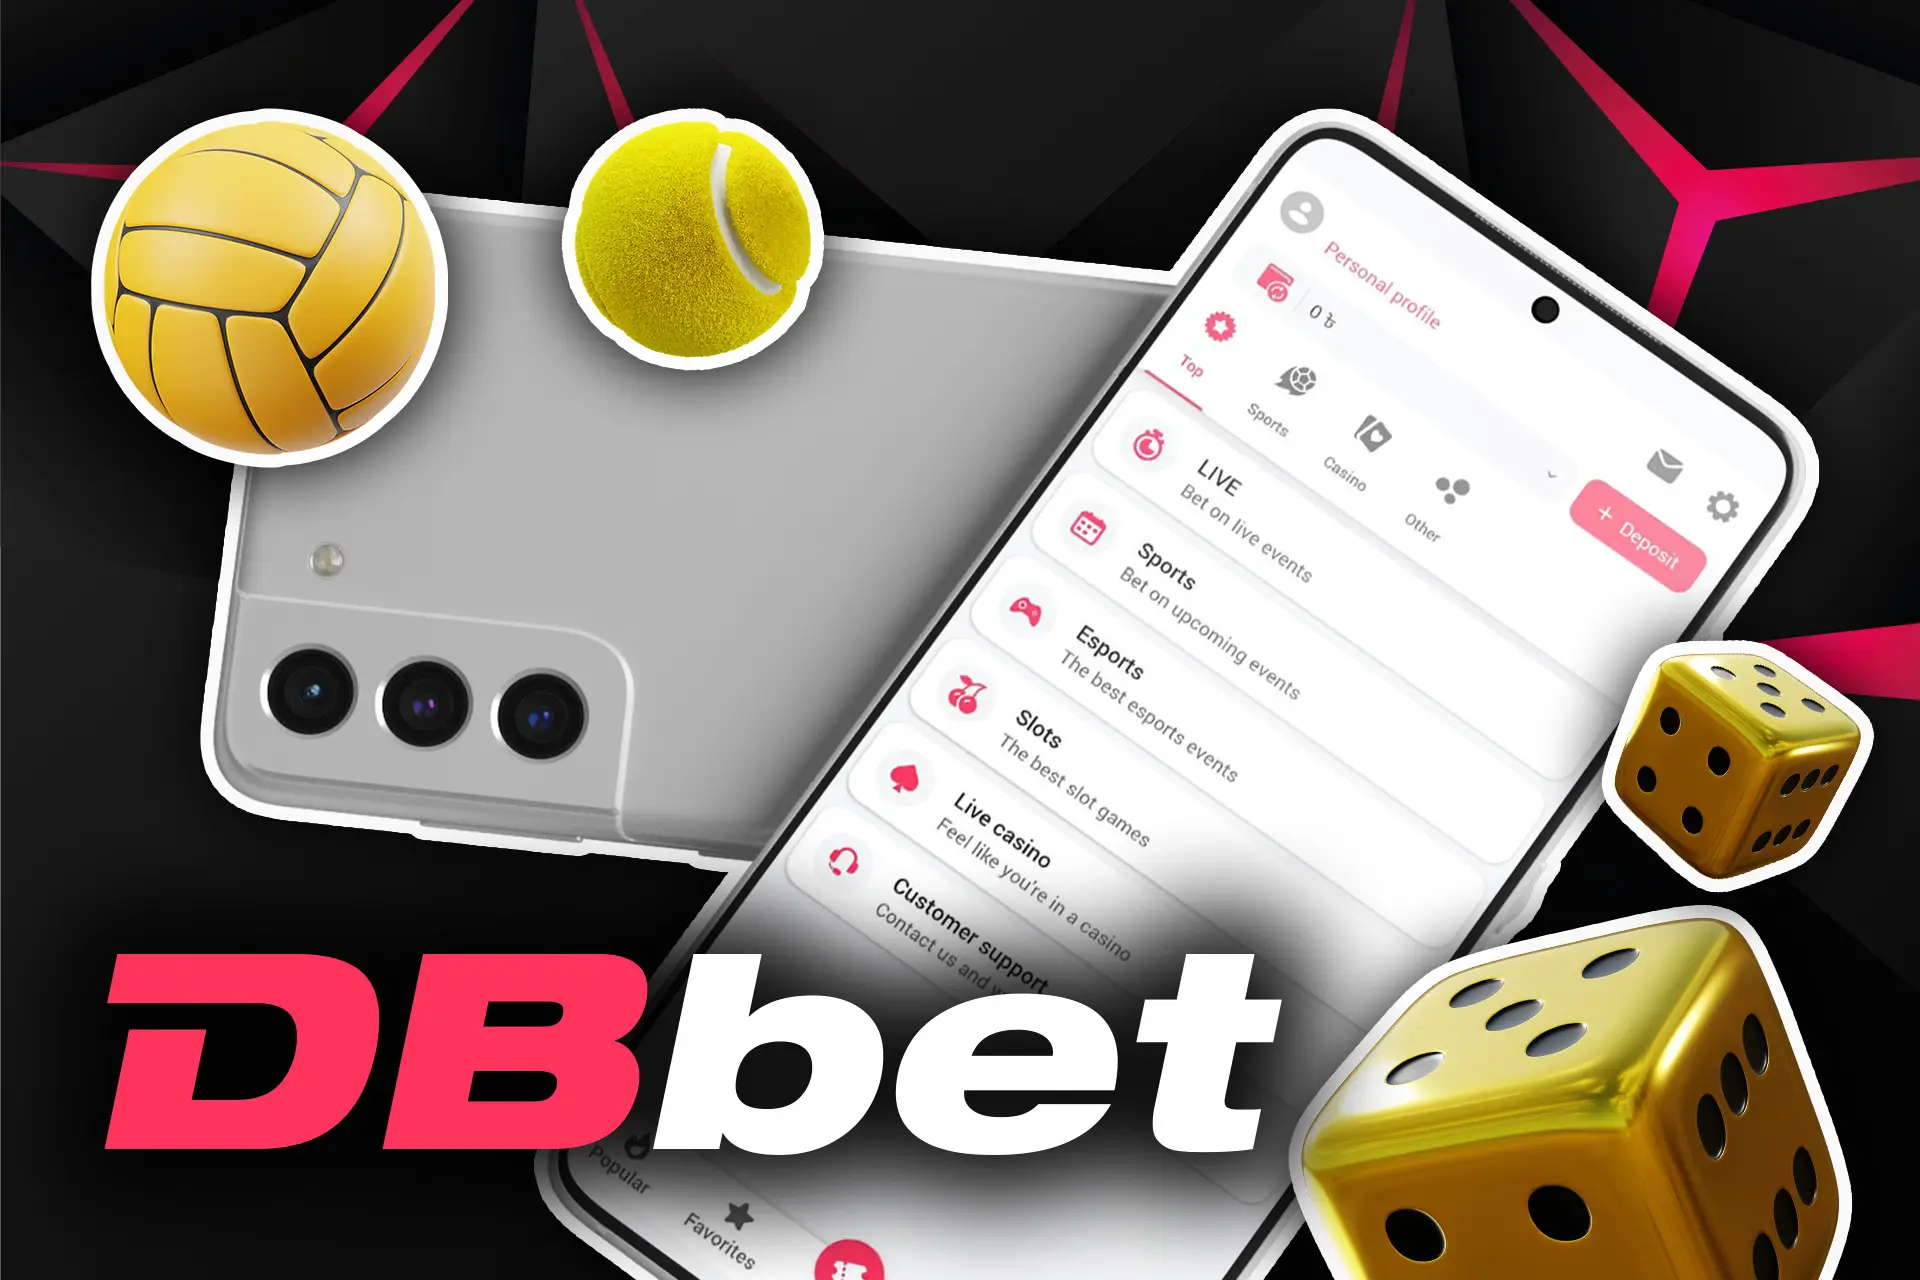 In the DBbet app, try different options for sports betting.